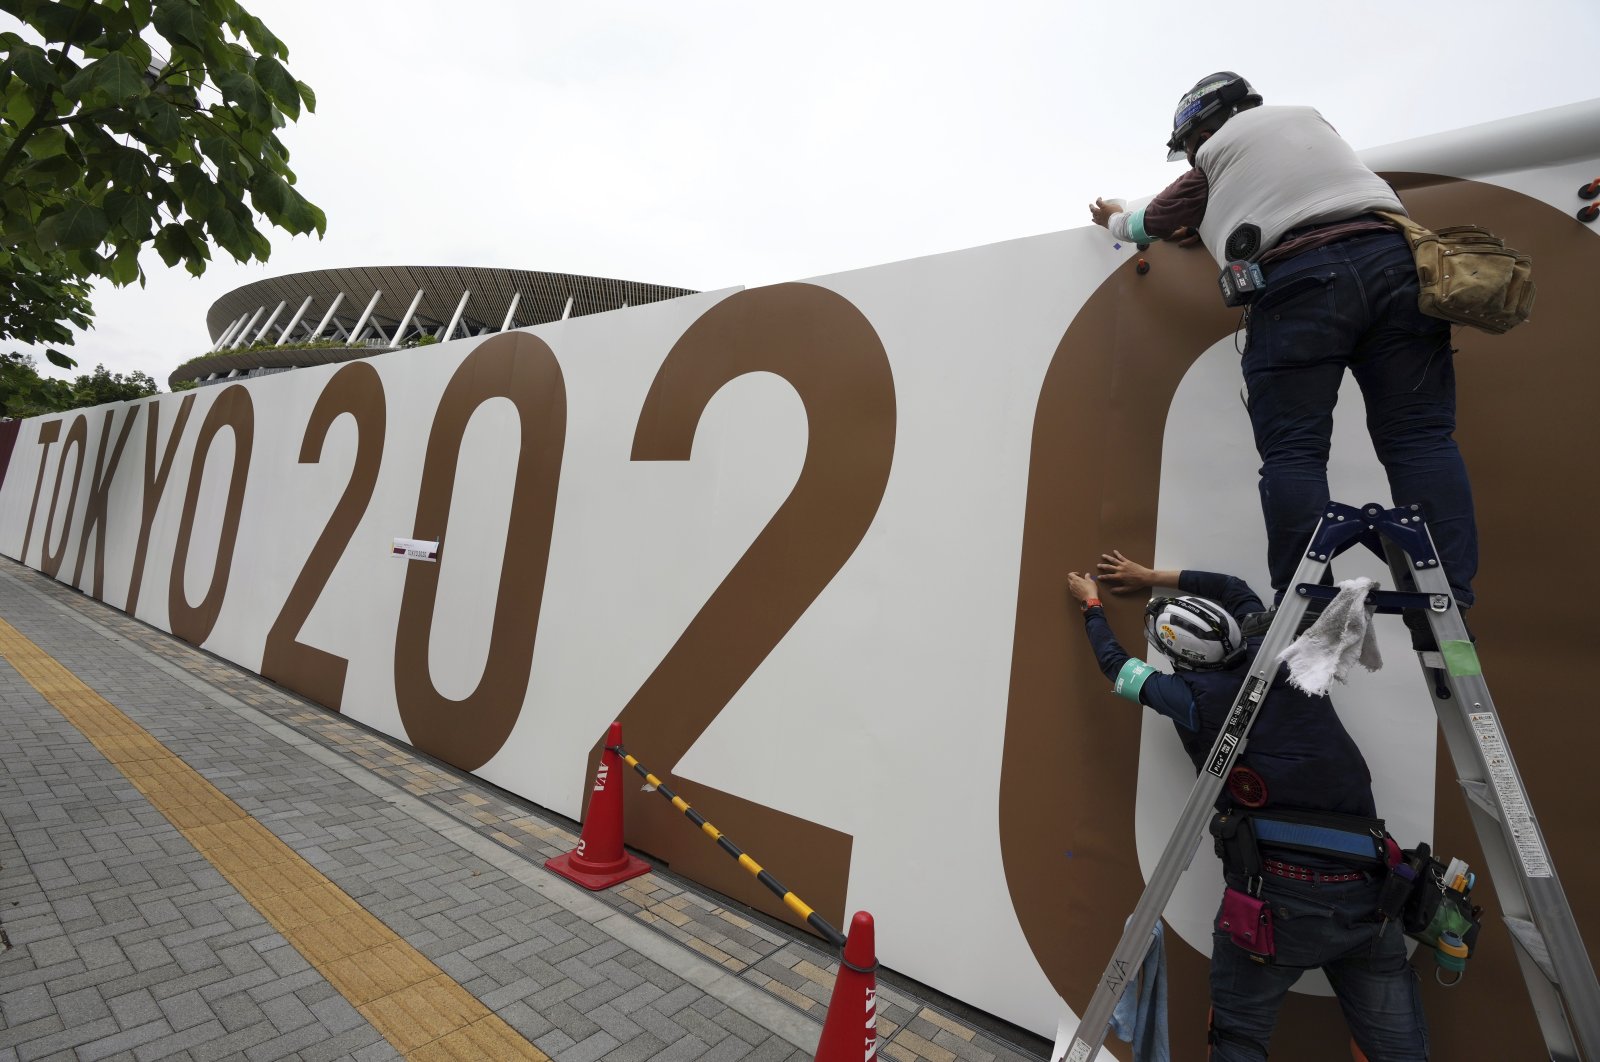 Workers paste the overlay on the wall of the National Stadium, where the opening ceremony and many other events are scheduled for the Tokyo 2020 Olympics, Tokyo, Japan, June 2, 2021. (AP Photo)